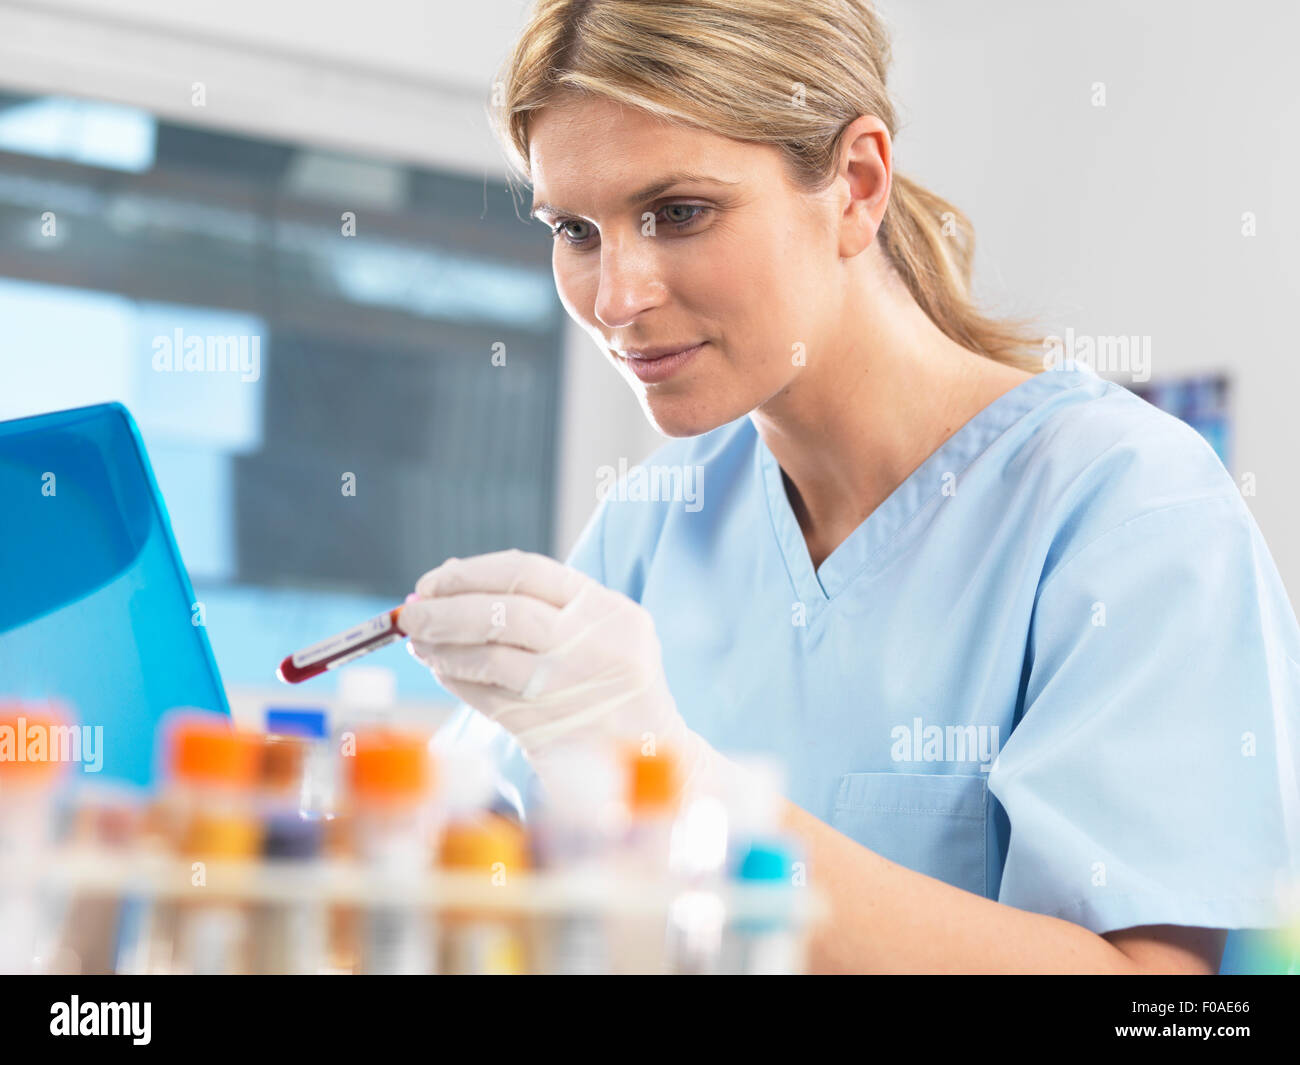 Medical researcher viewing data on a computer for a blood sample during testing Stock Photo